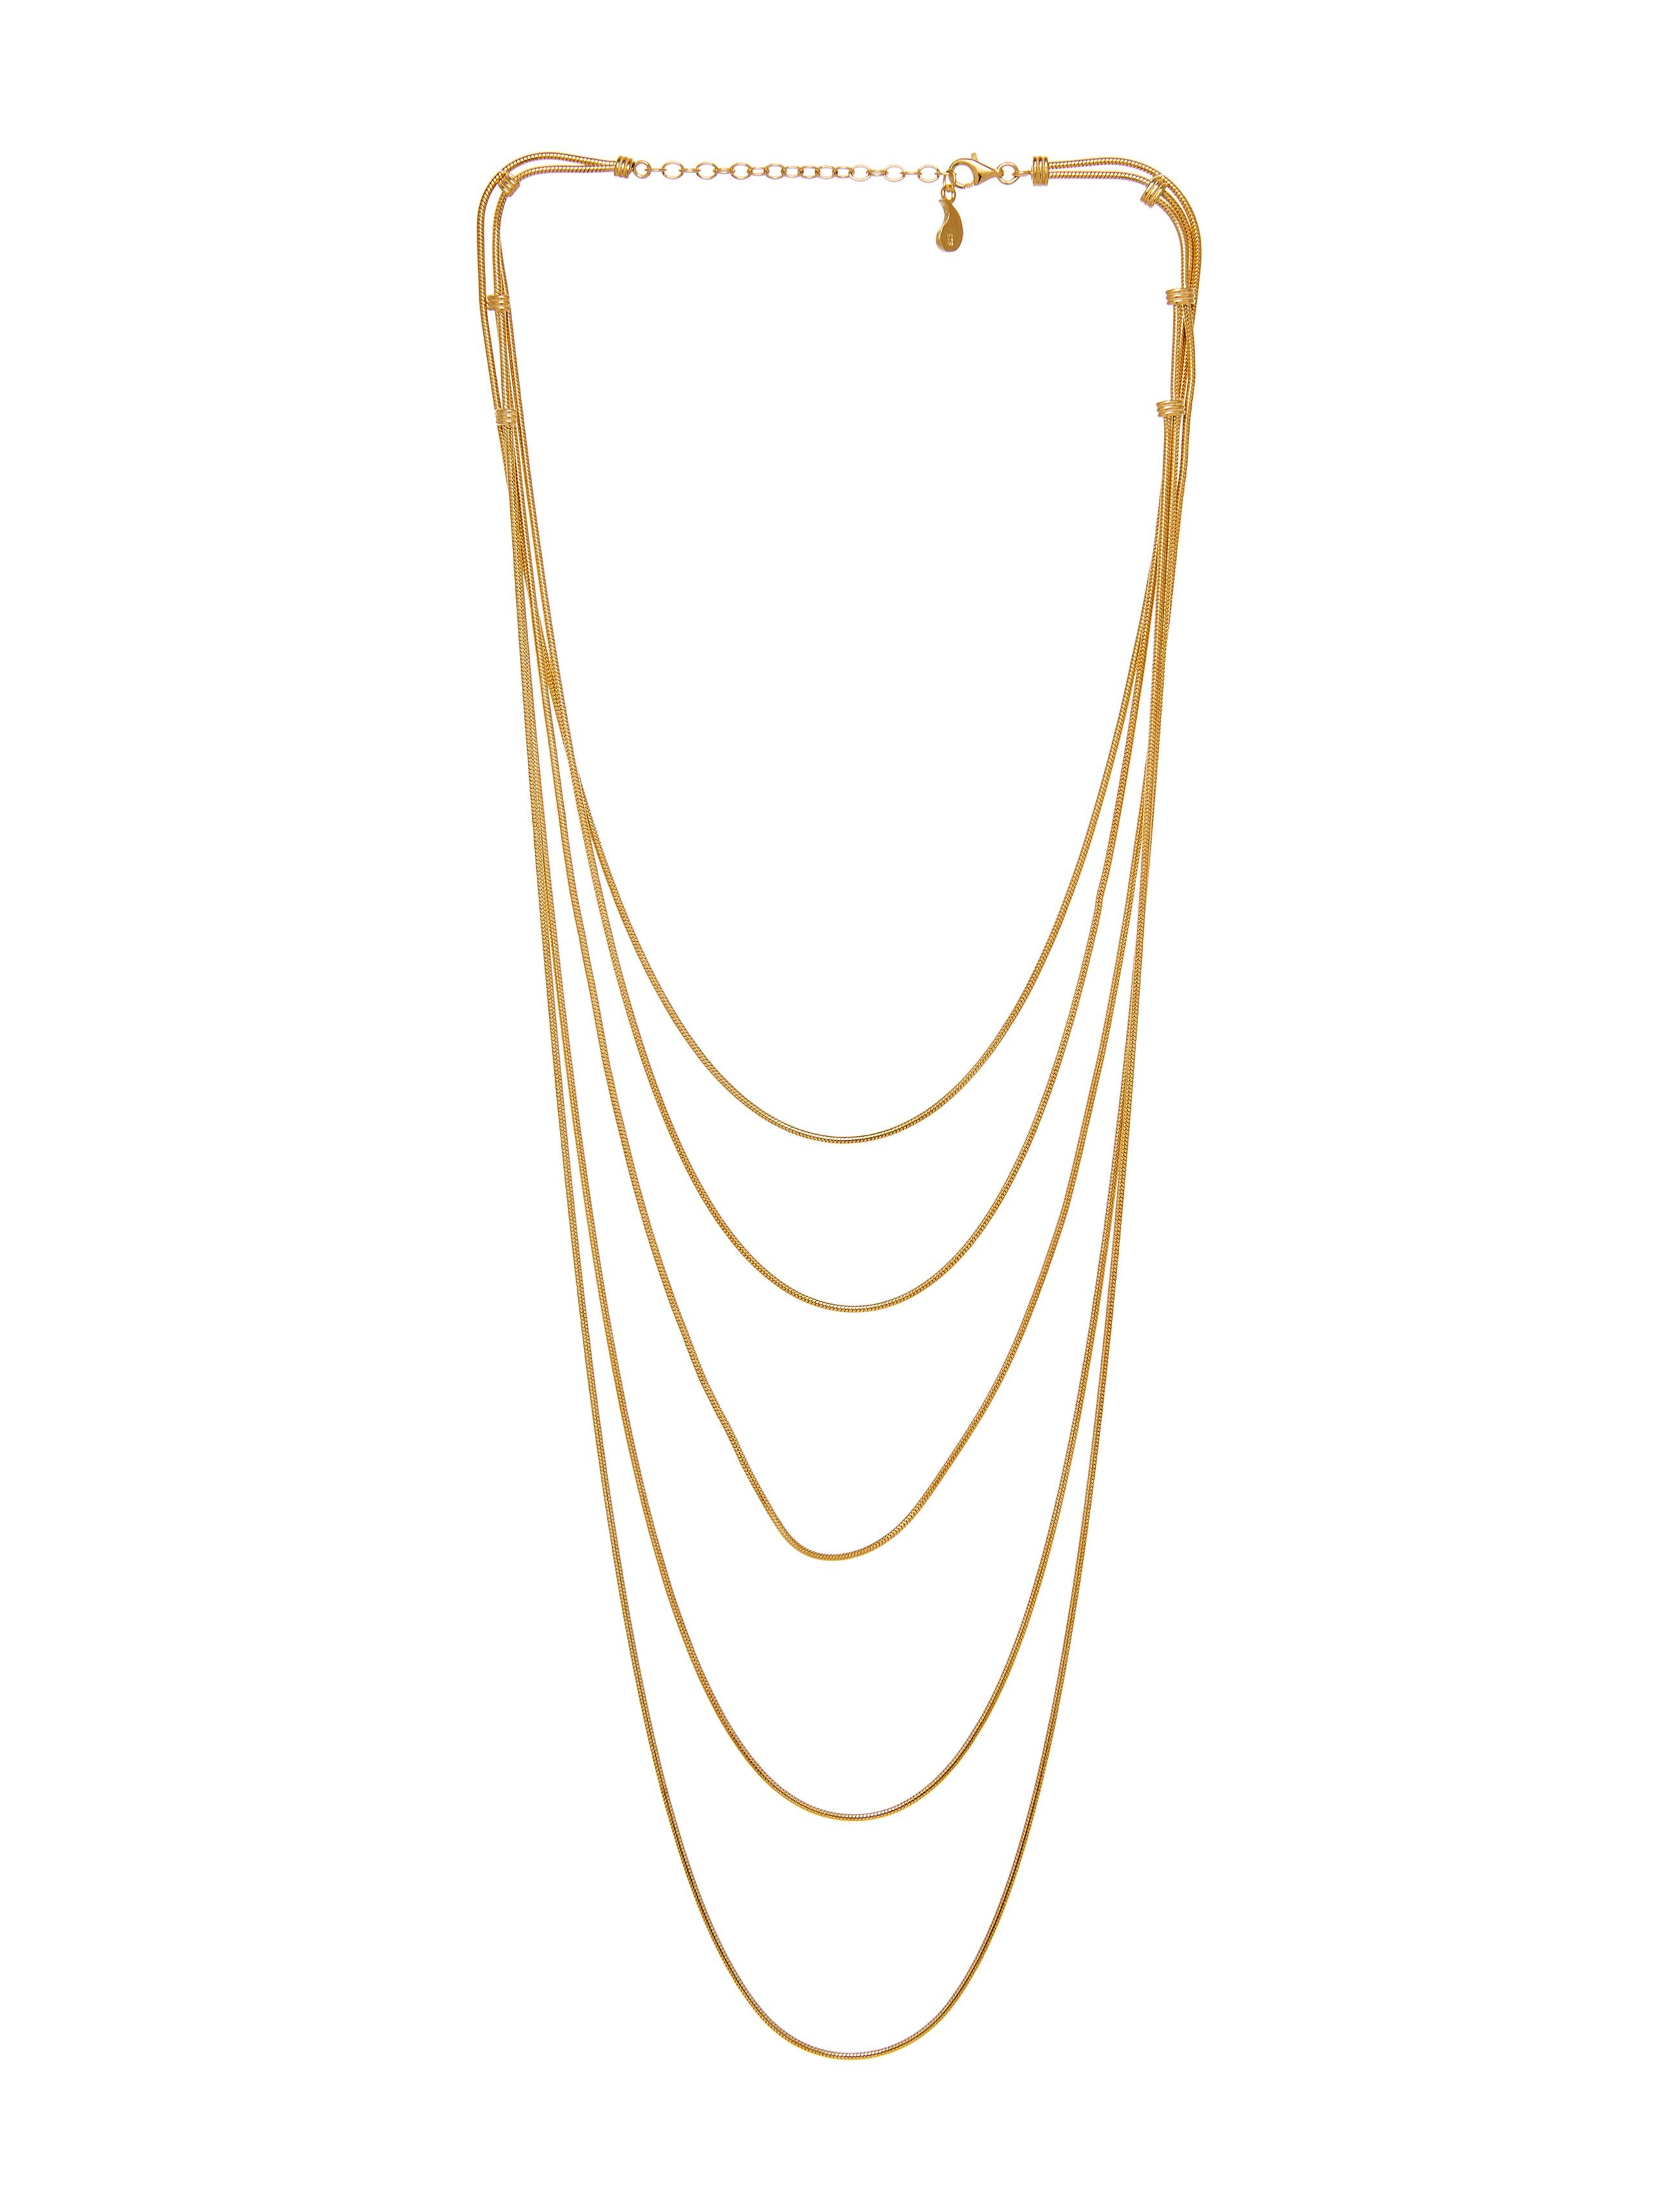 Necklace Snake Chain Minimal Long Movement 18K Gold-Plated Silver Greek Jewelry In New Condition For Sale In Athens, GR